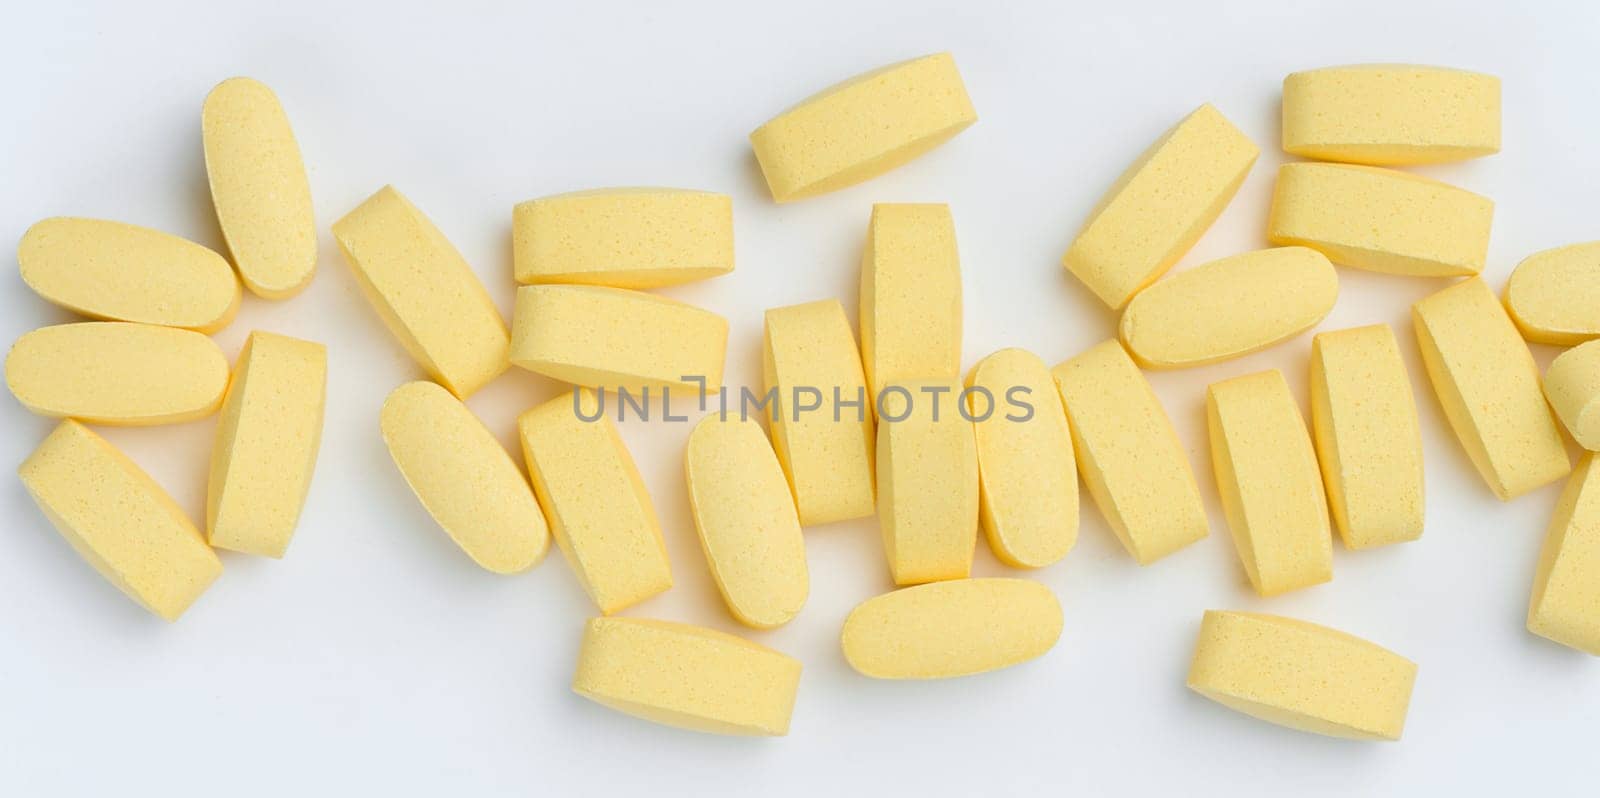 Yellow oval tablets on a white background, top view